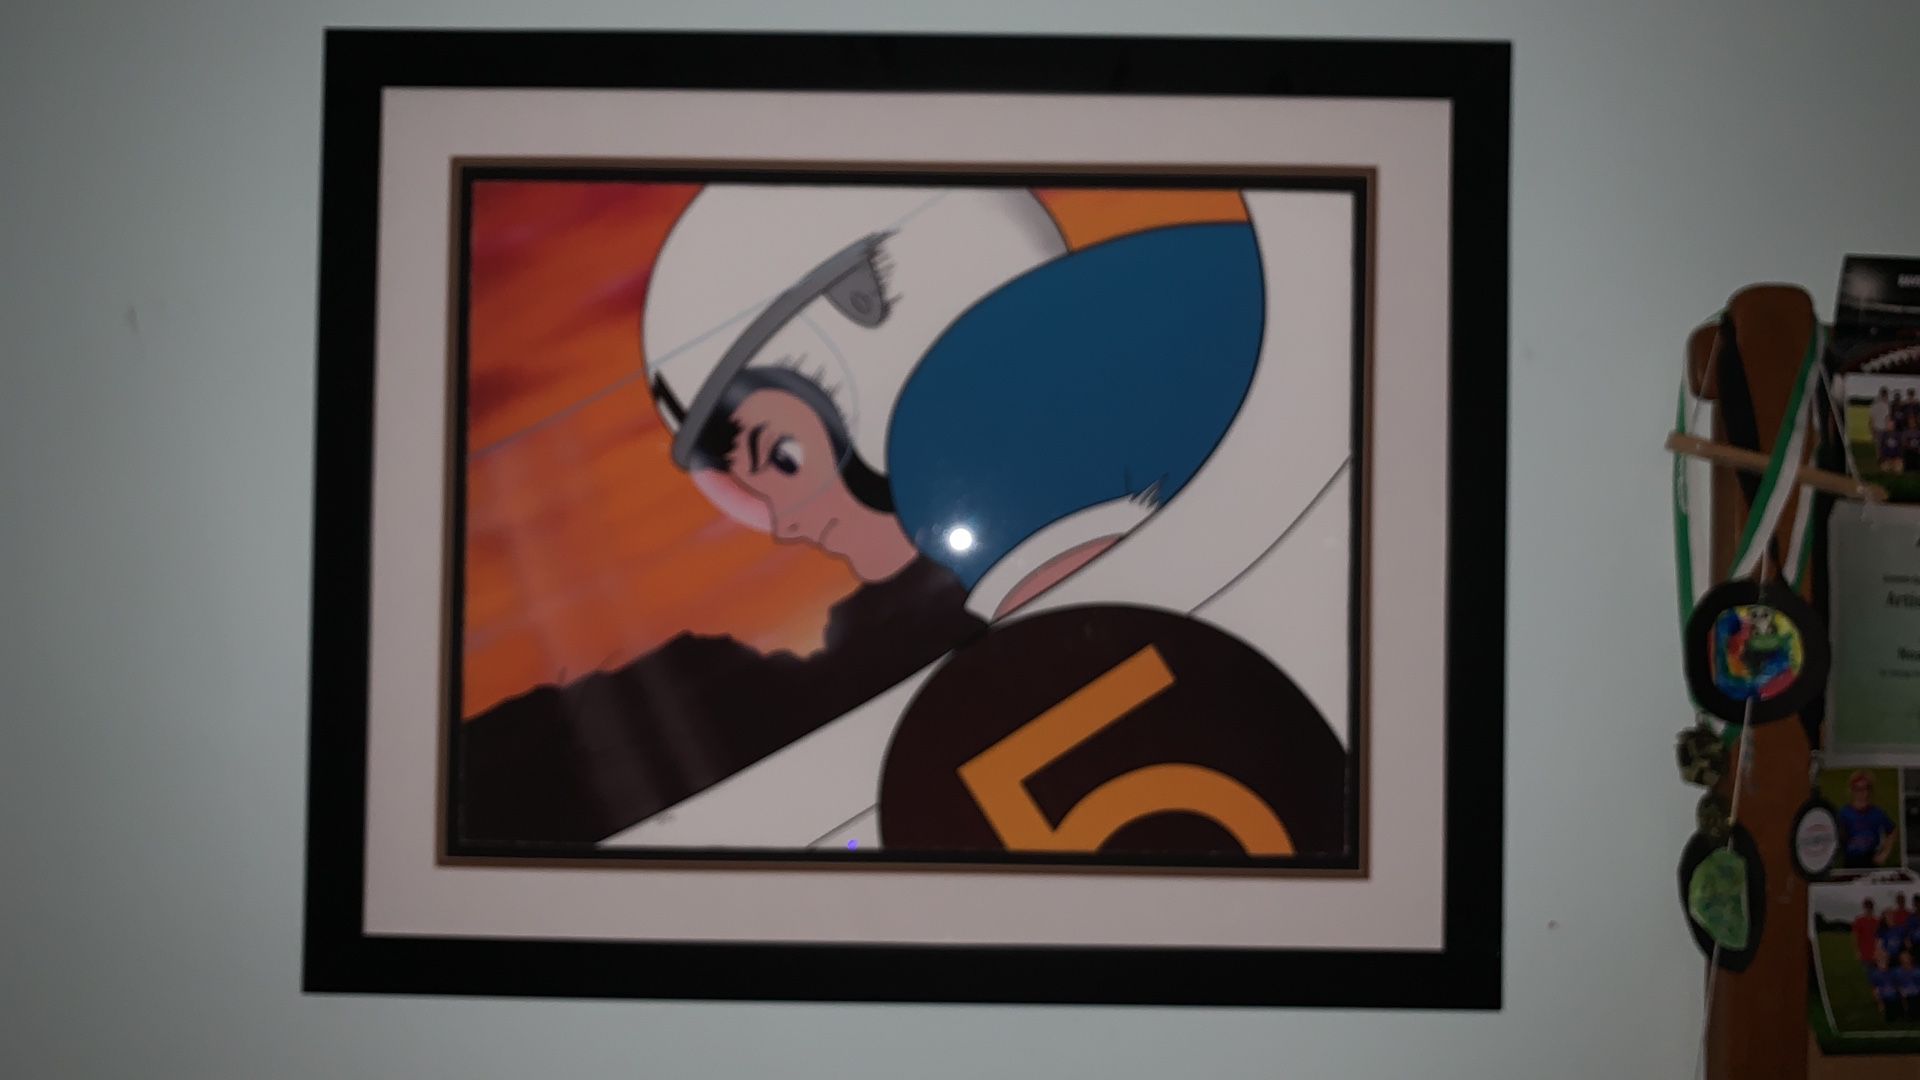 Do you like speed racer. Here are two large frame pictures of it. Free!